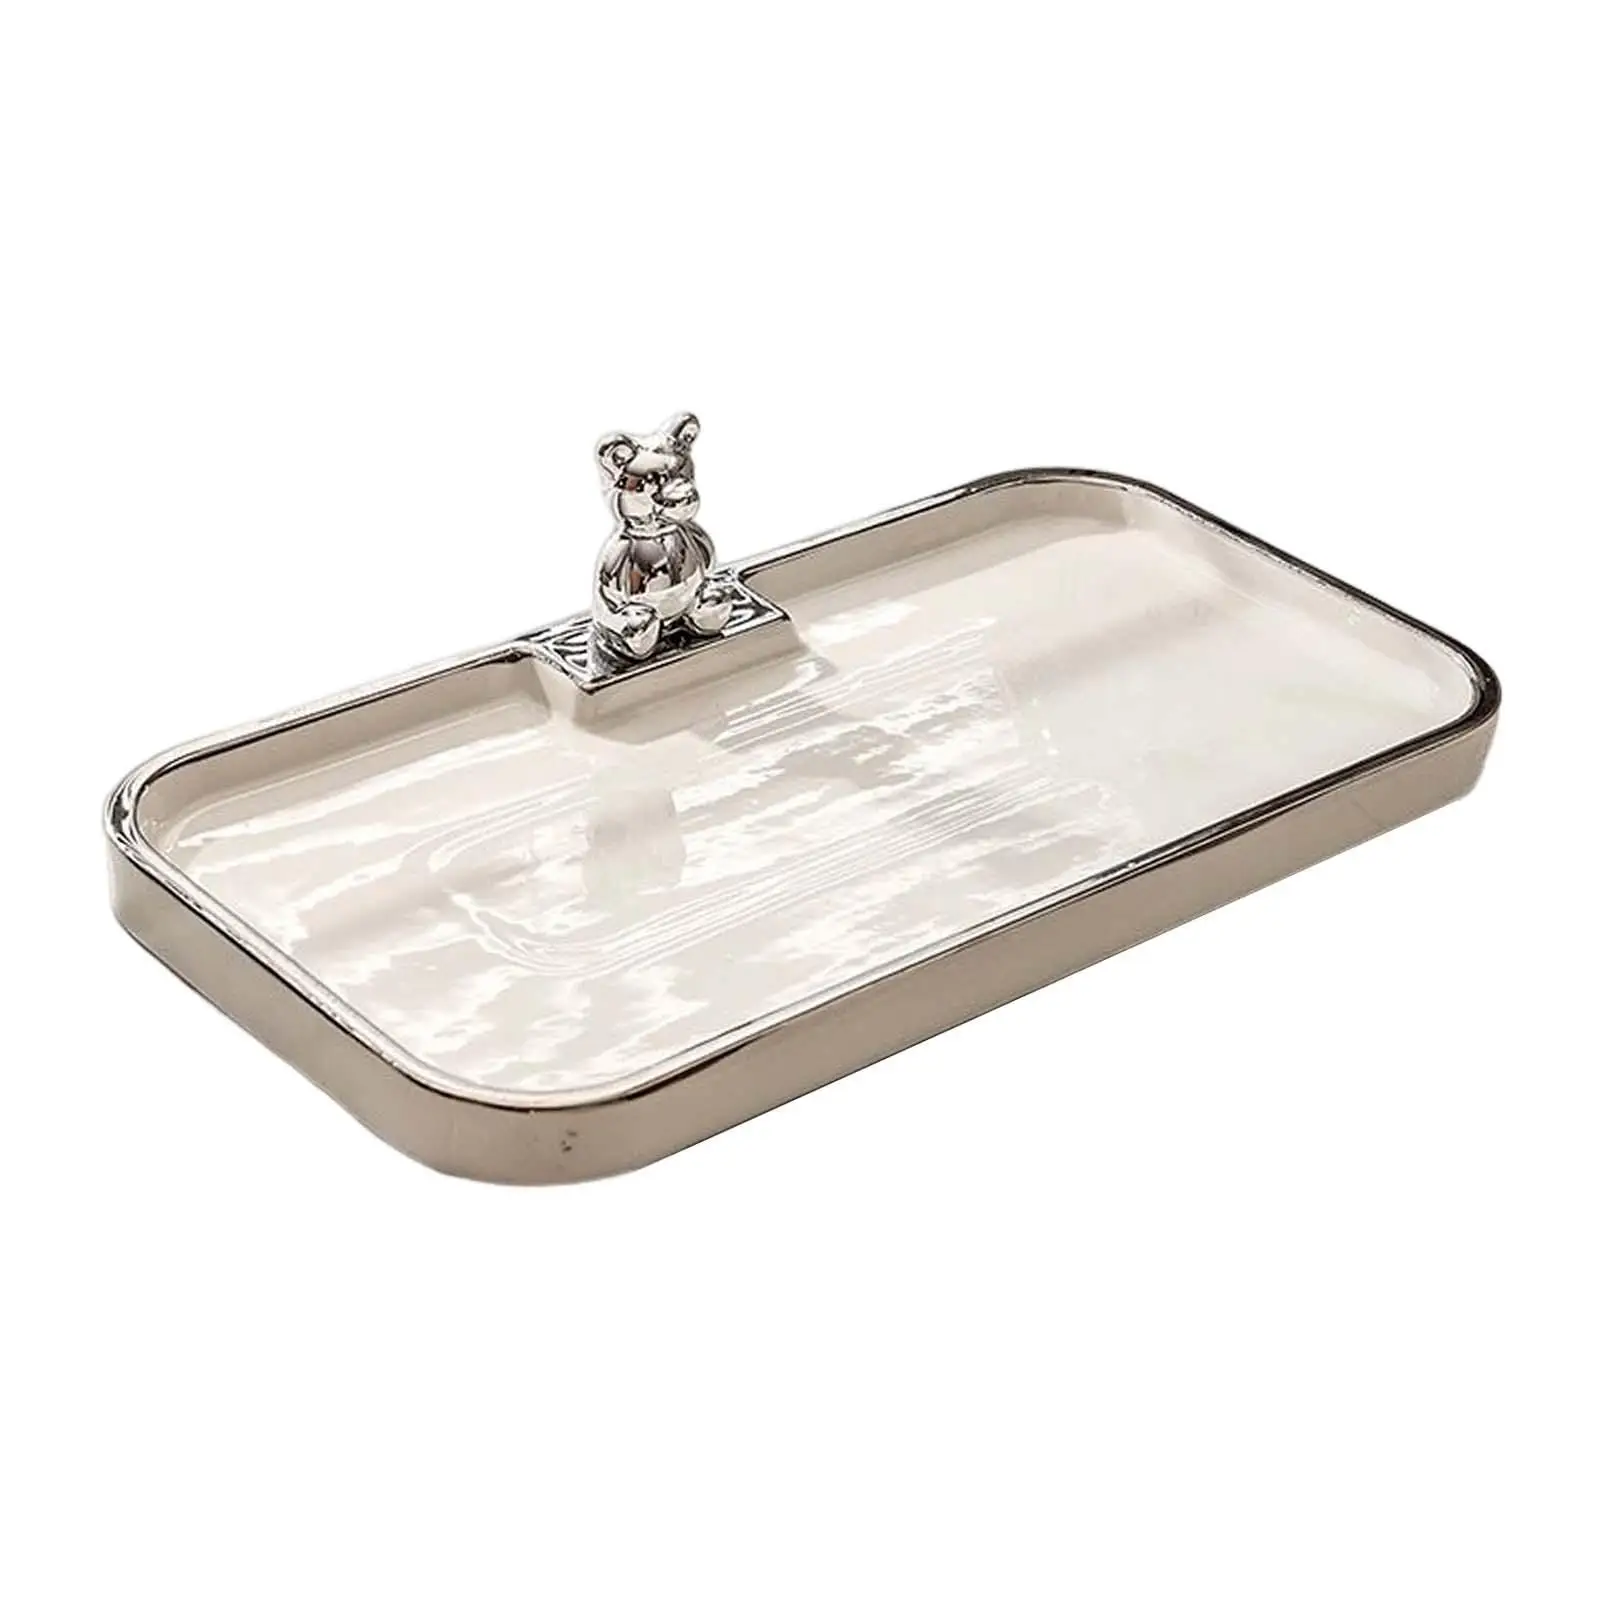 Perfume Candle Tray Decorative Tray for Cabinet Linen Closet Bedside Table